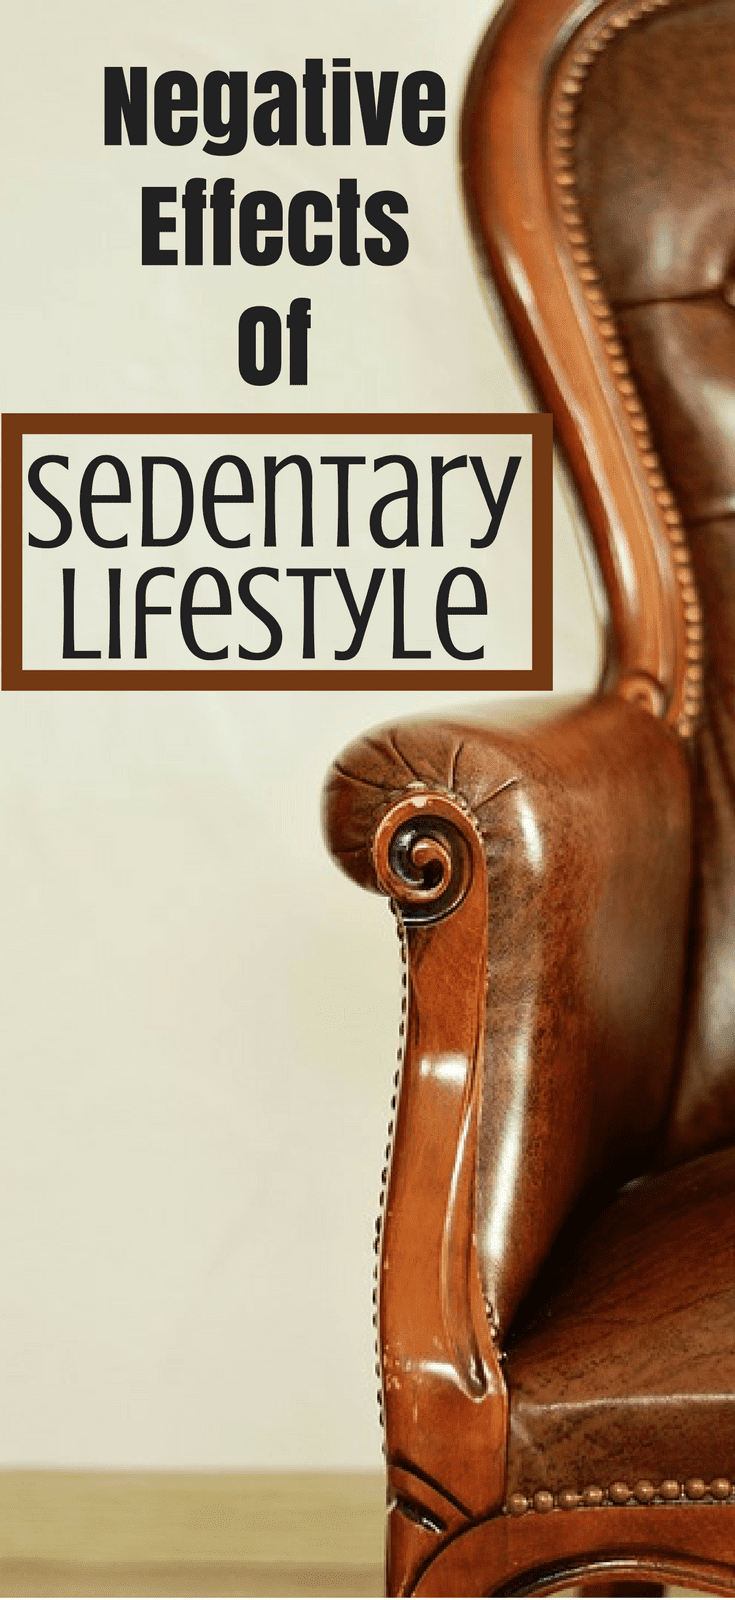 The Negative Effects Of Sedentary Lifestyle